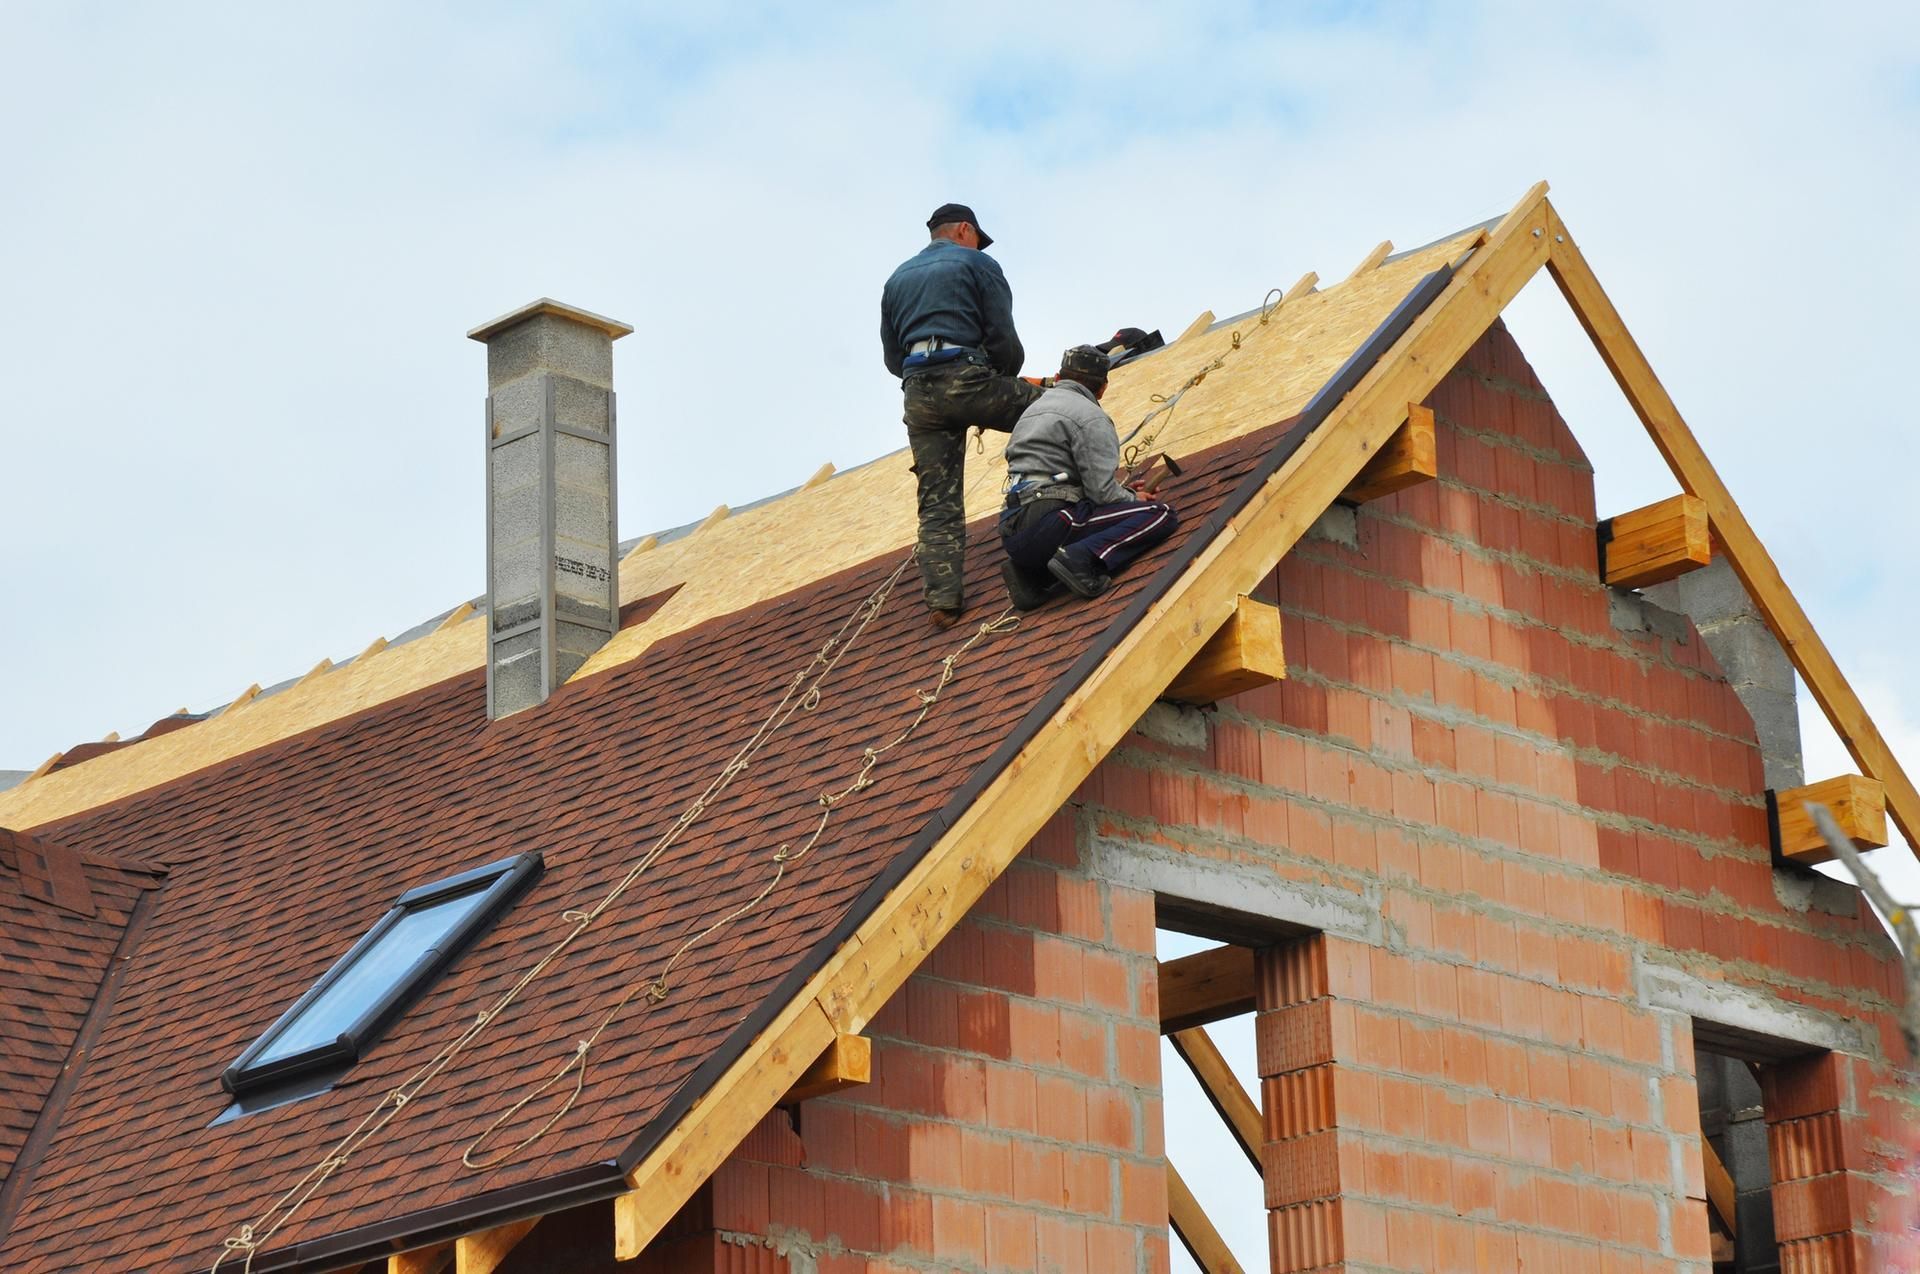 two men are working on the roof of a house under construction .